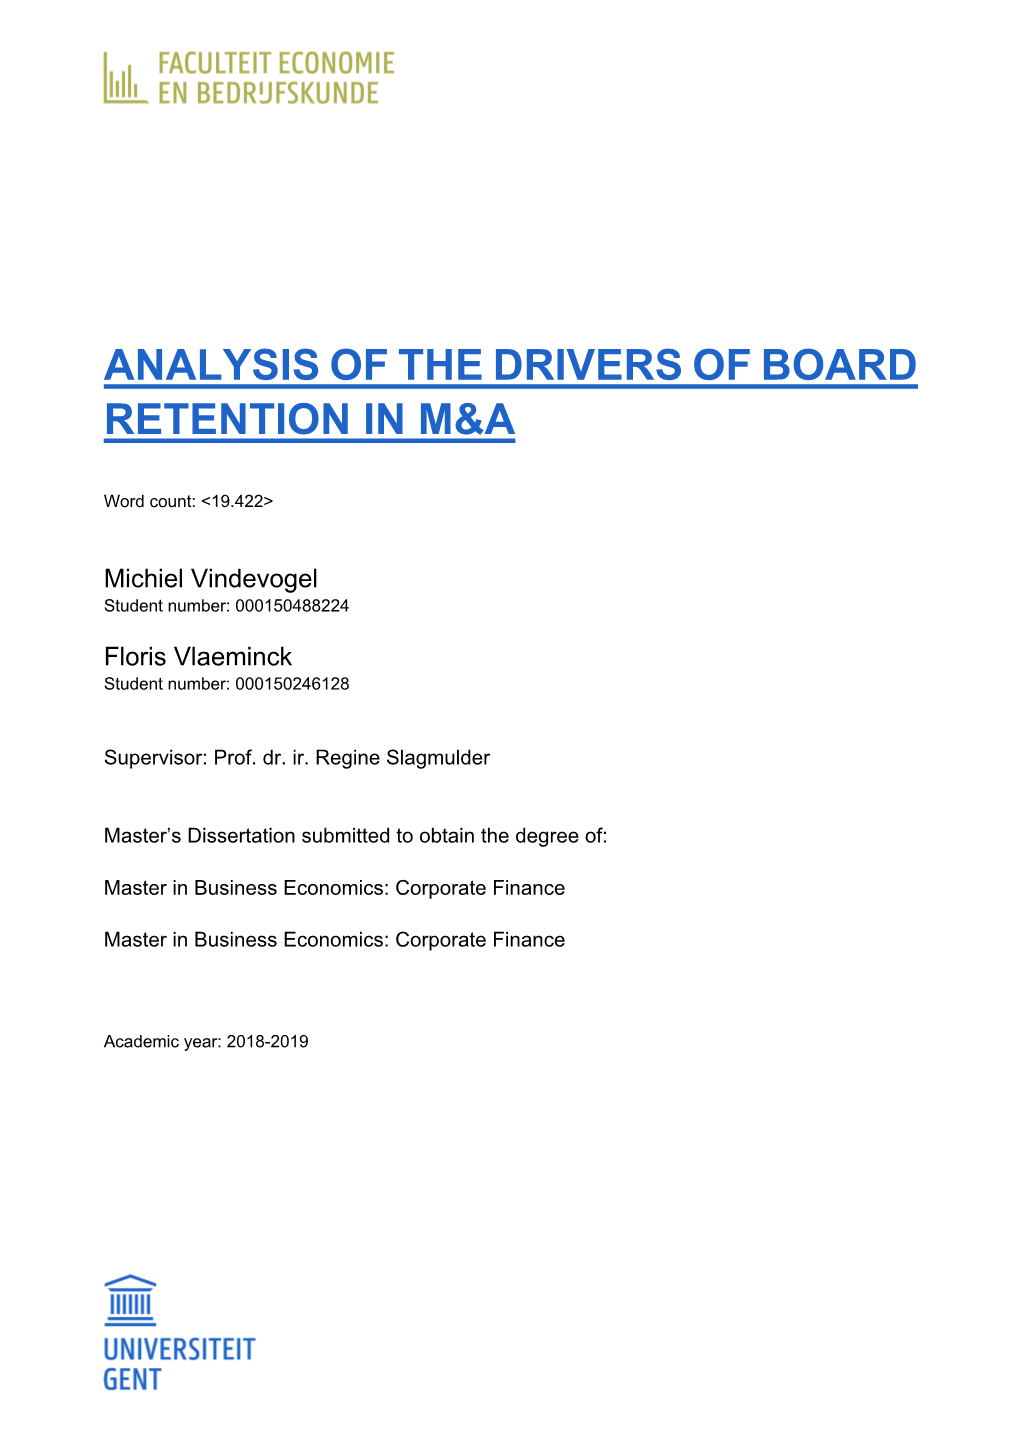 Analysis of the Drivers of Board Retention in M&A